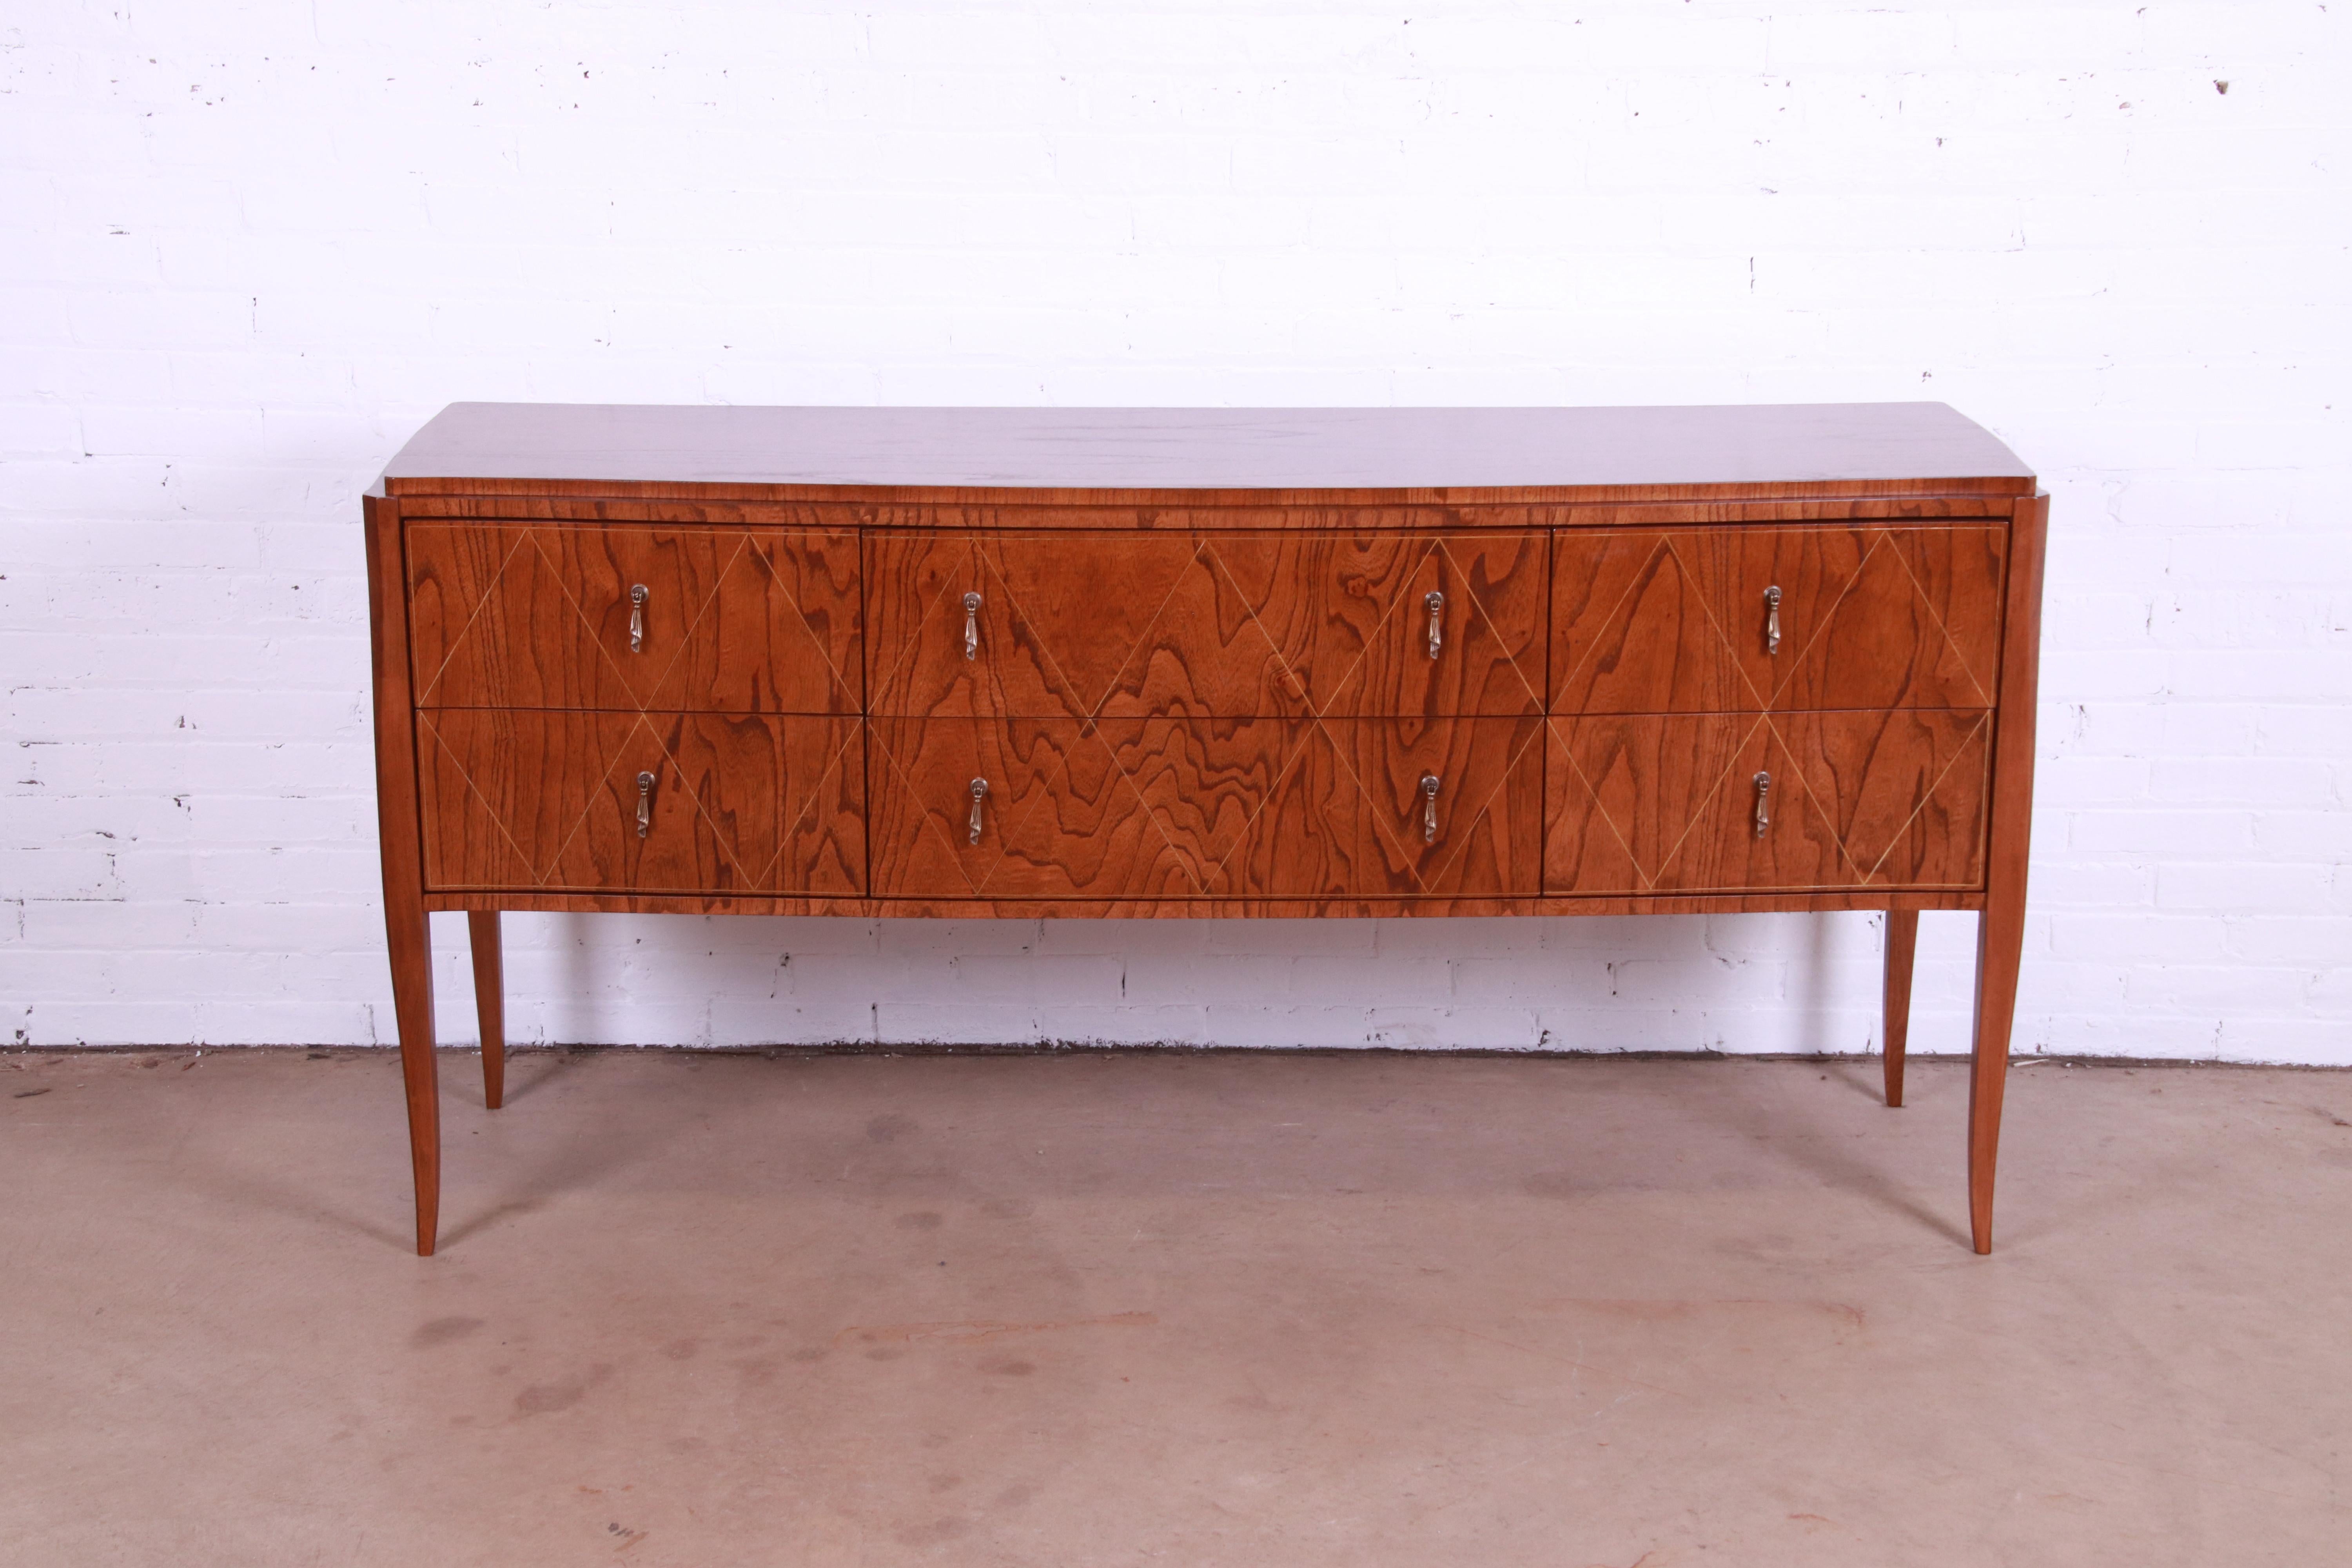 A gorgeous French Regency Louis XV style sideboard, credenza, or media cabinet

By Edward Ferrell & Lewis Mittman

USA, Circa 1990s

Figured burl wood, with diamond design inlay, and original brass hardware.

Measures: 70